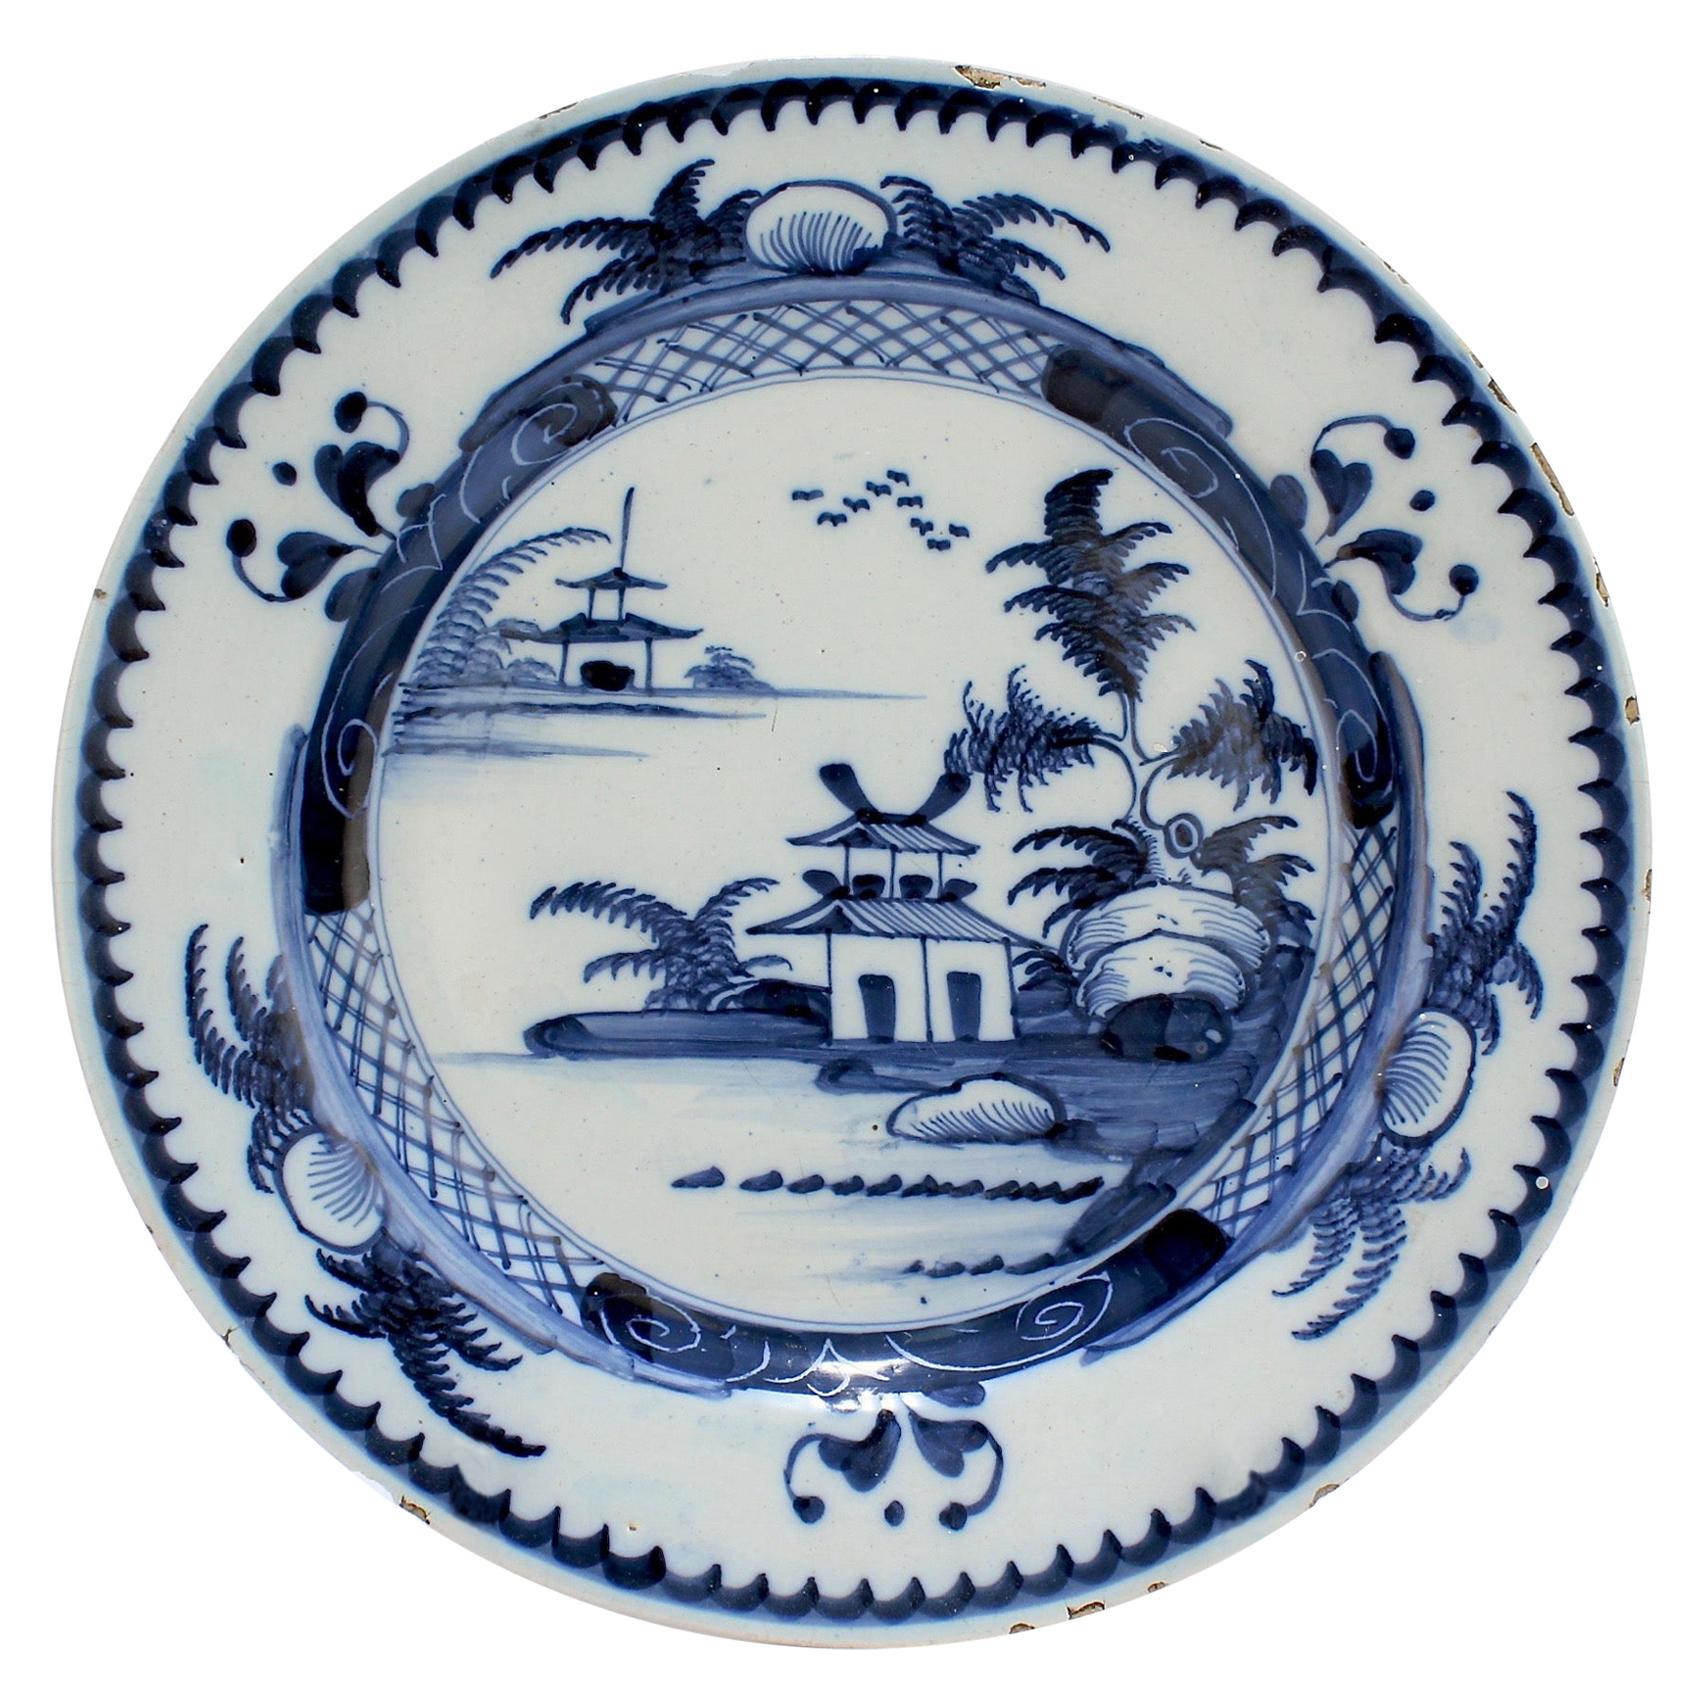 Antique Lambeth 18th Century English Delft Pottery Plate with Chinese Decoration